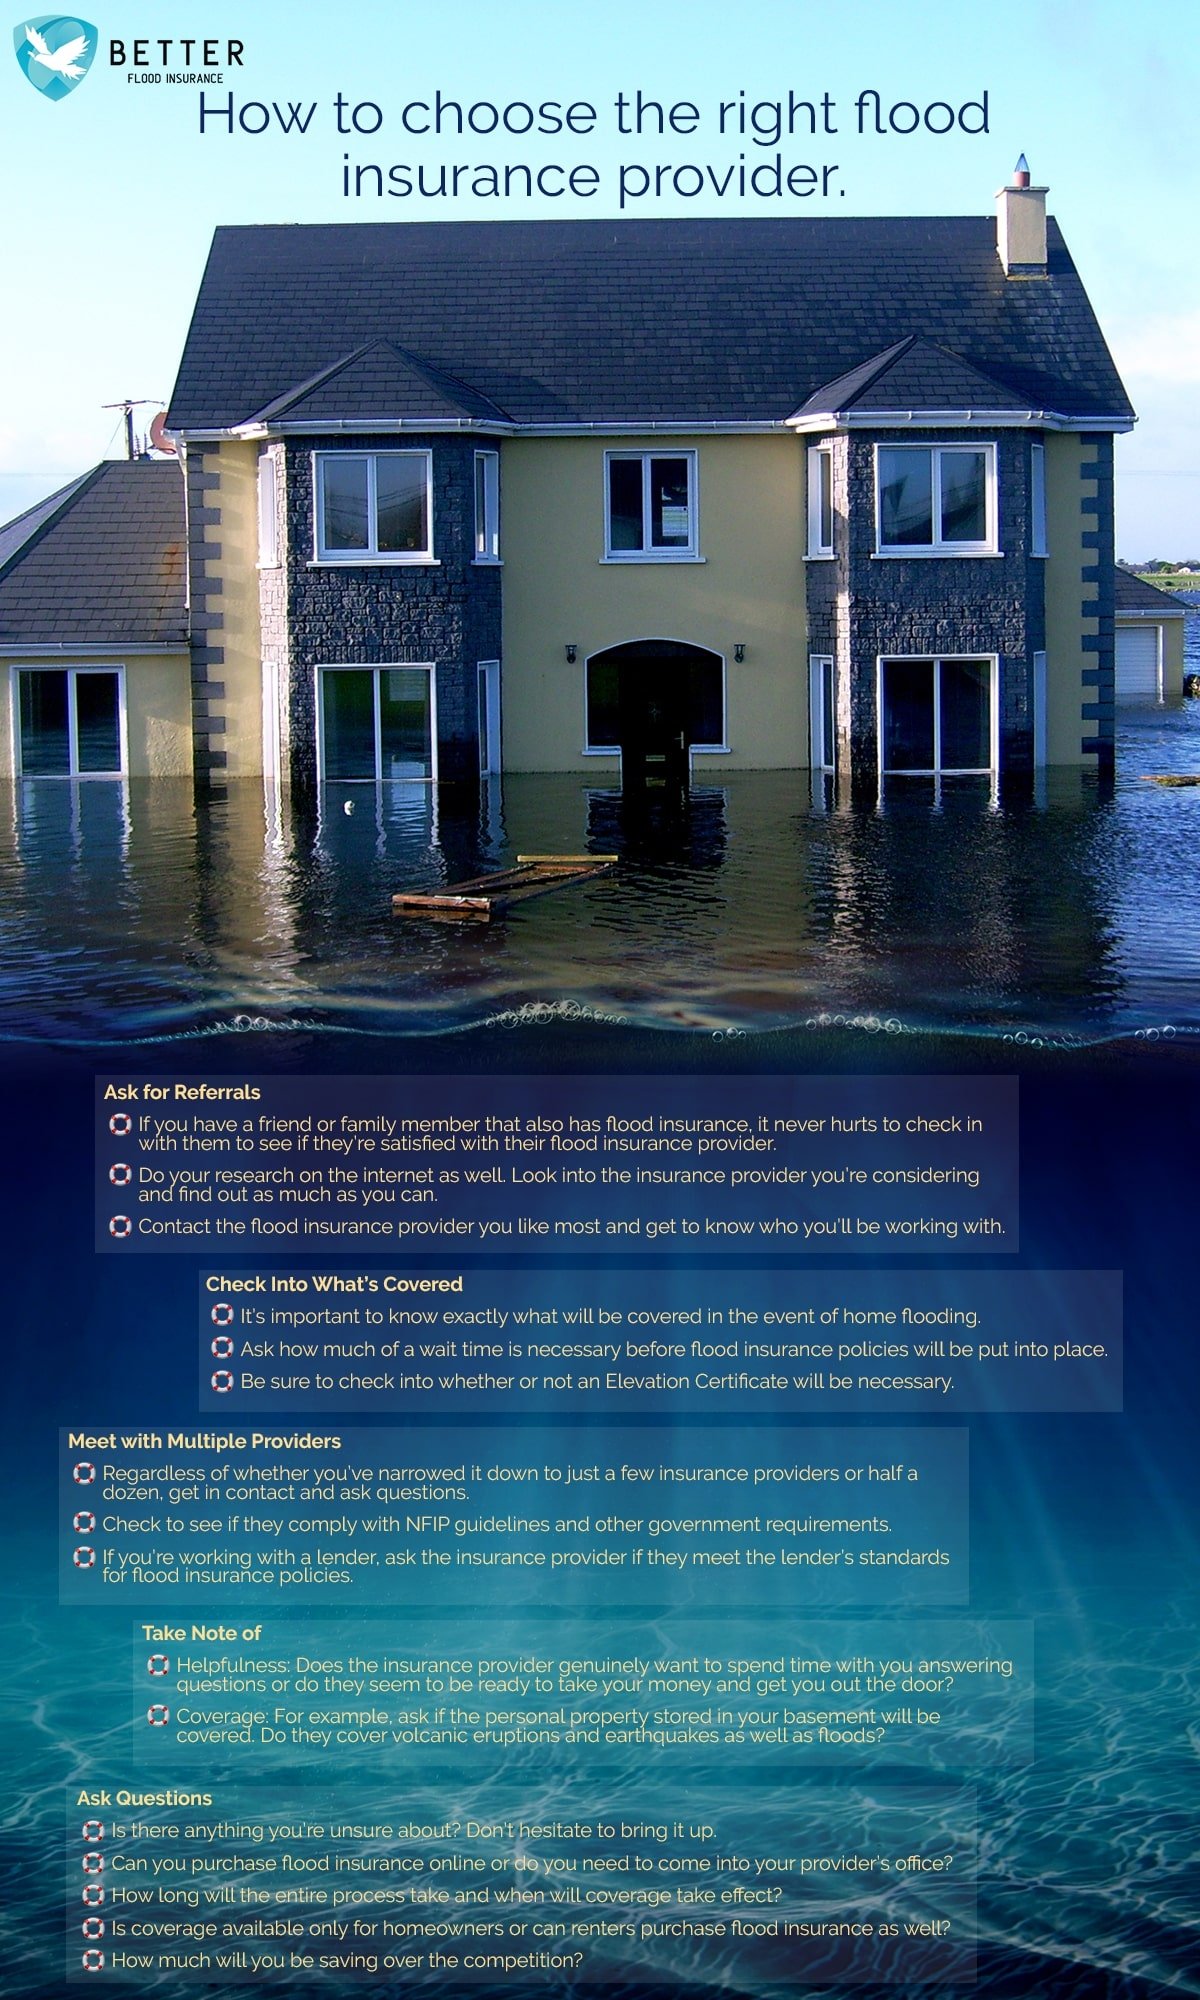 An infographic on how to choose a flood insurance provider.